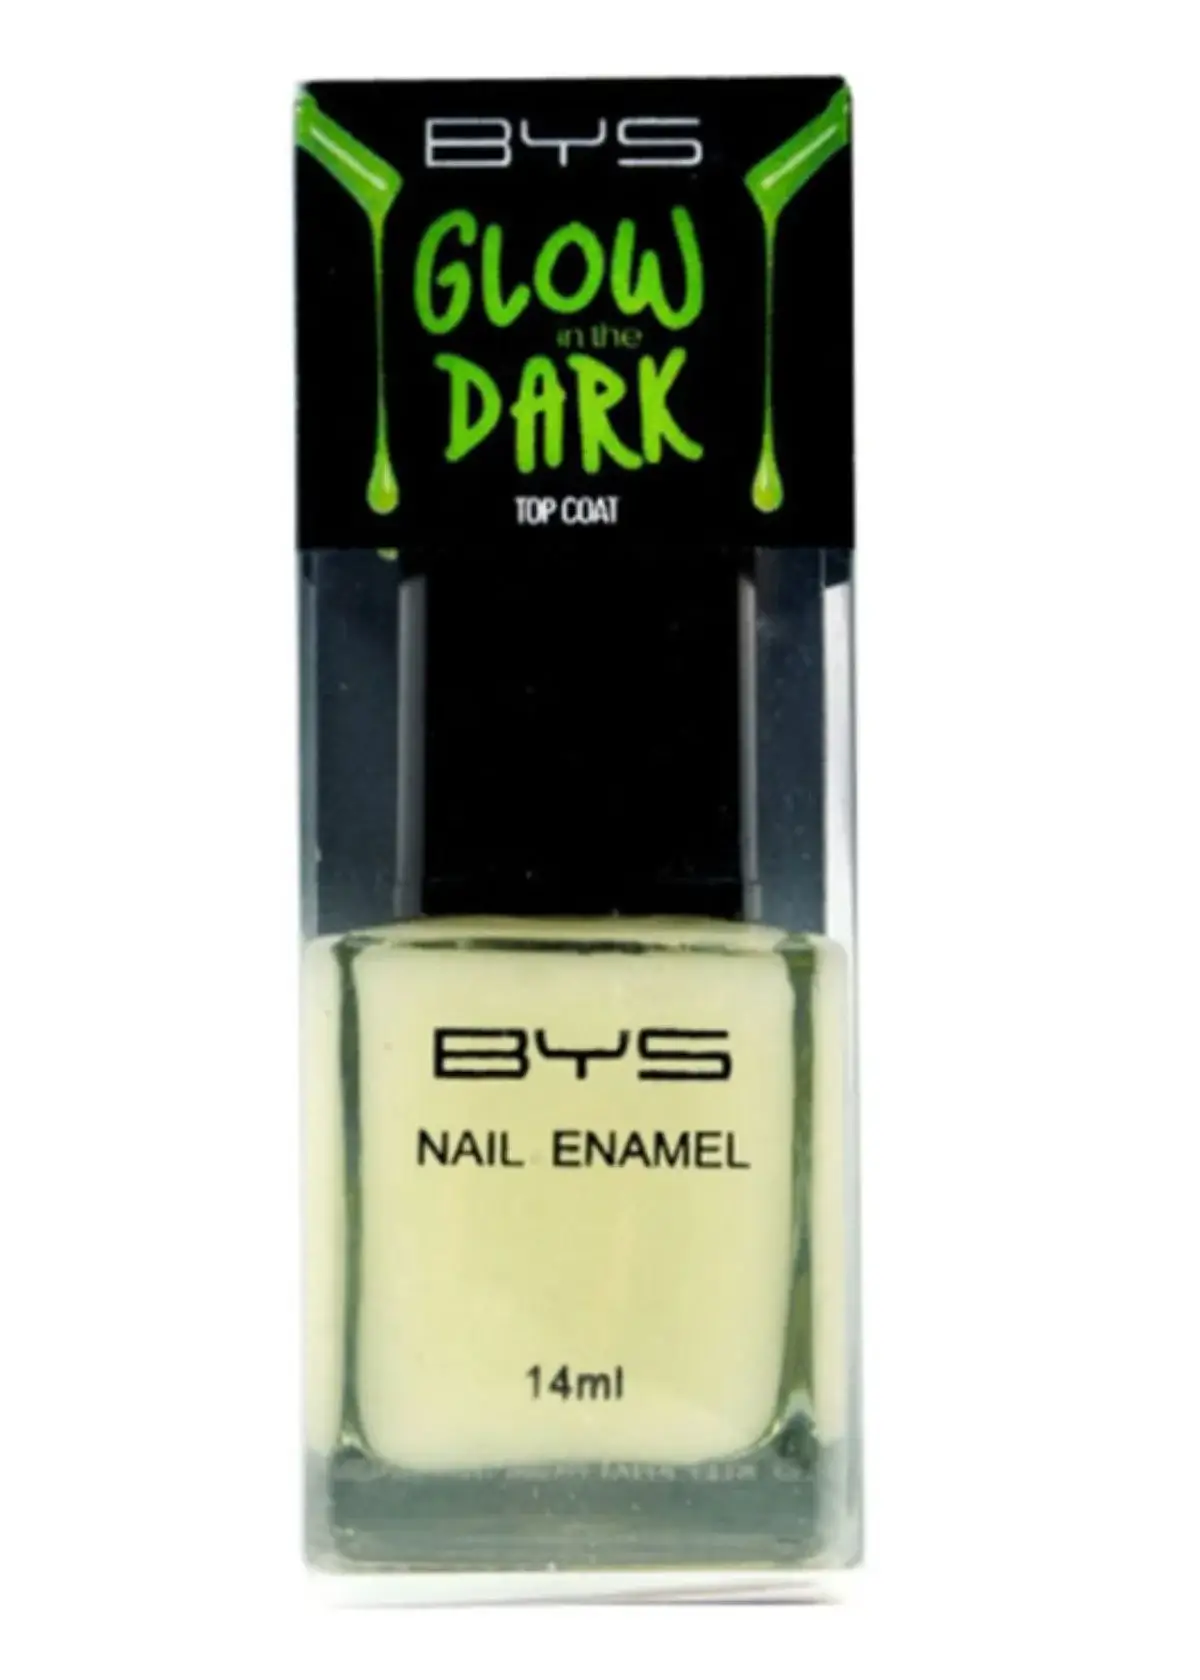 How does glow in the dark nail polish work?